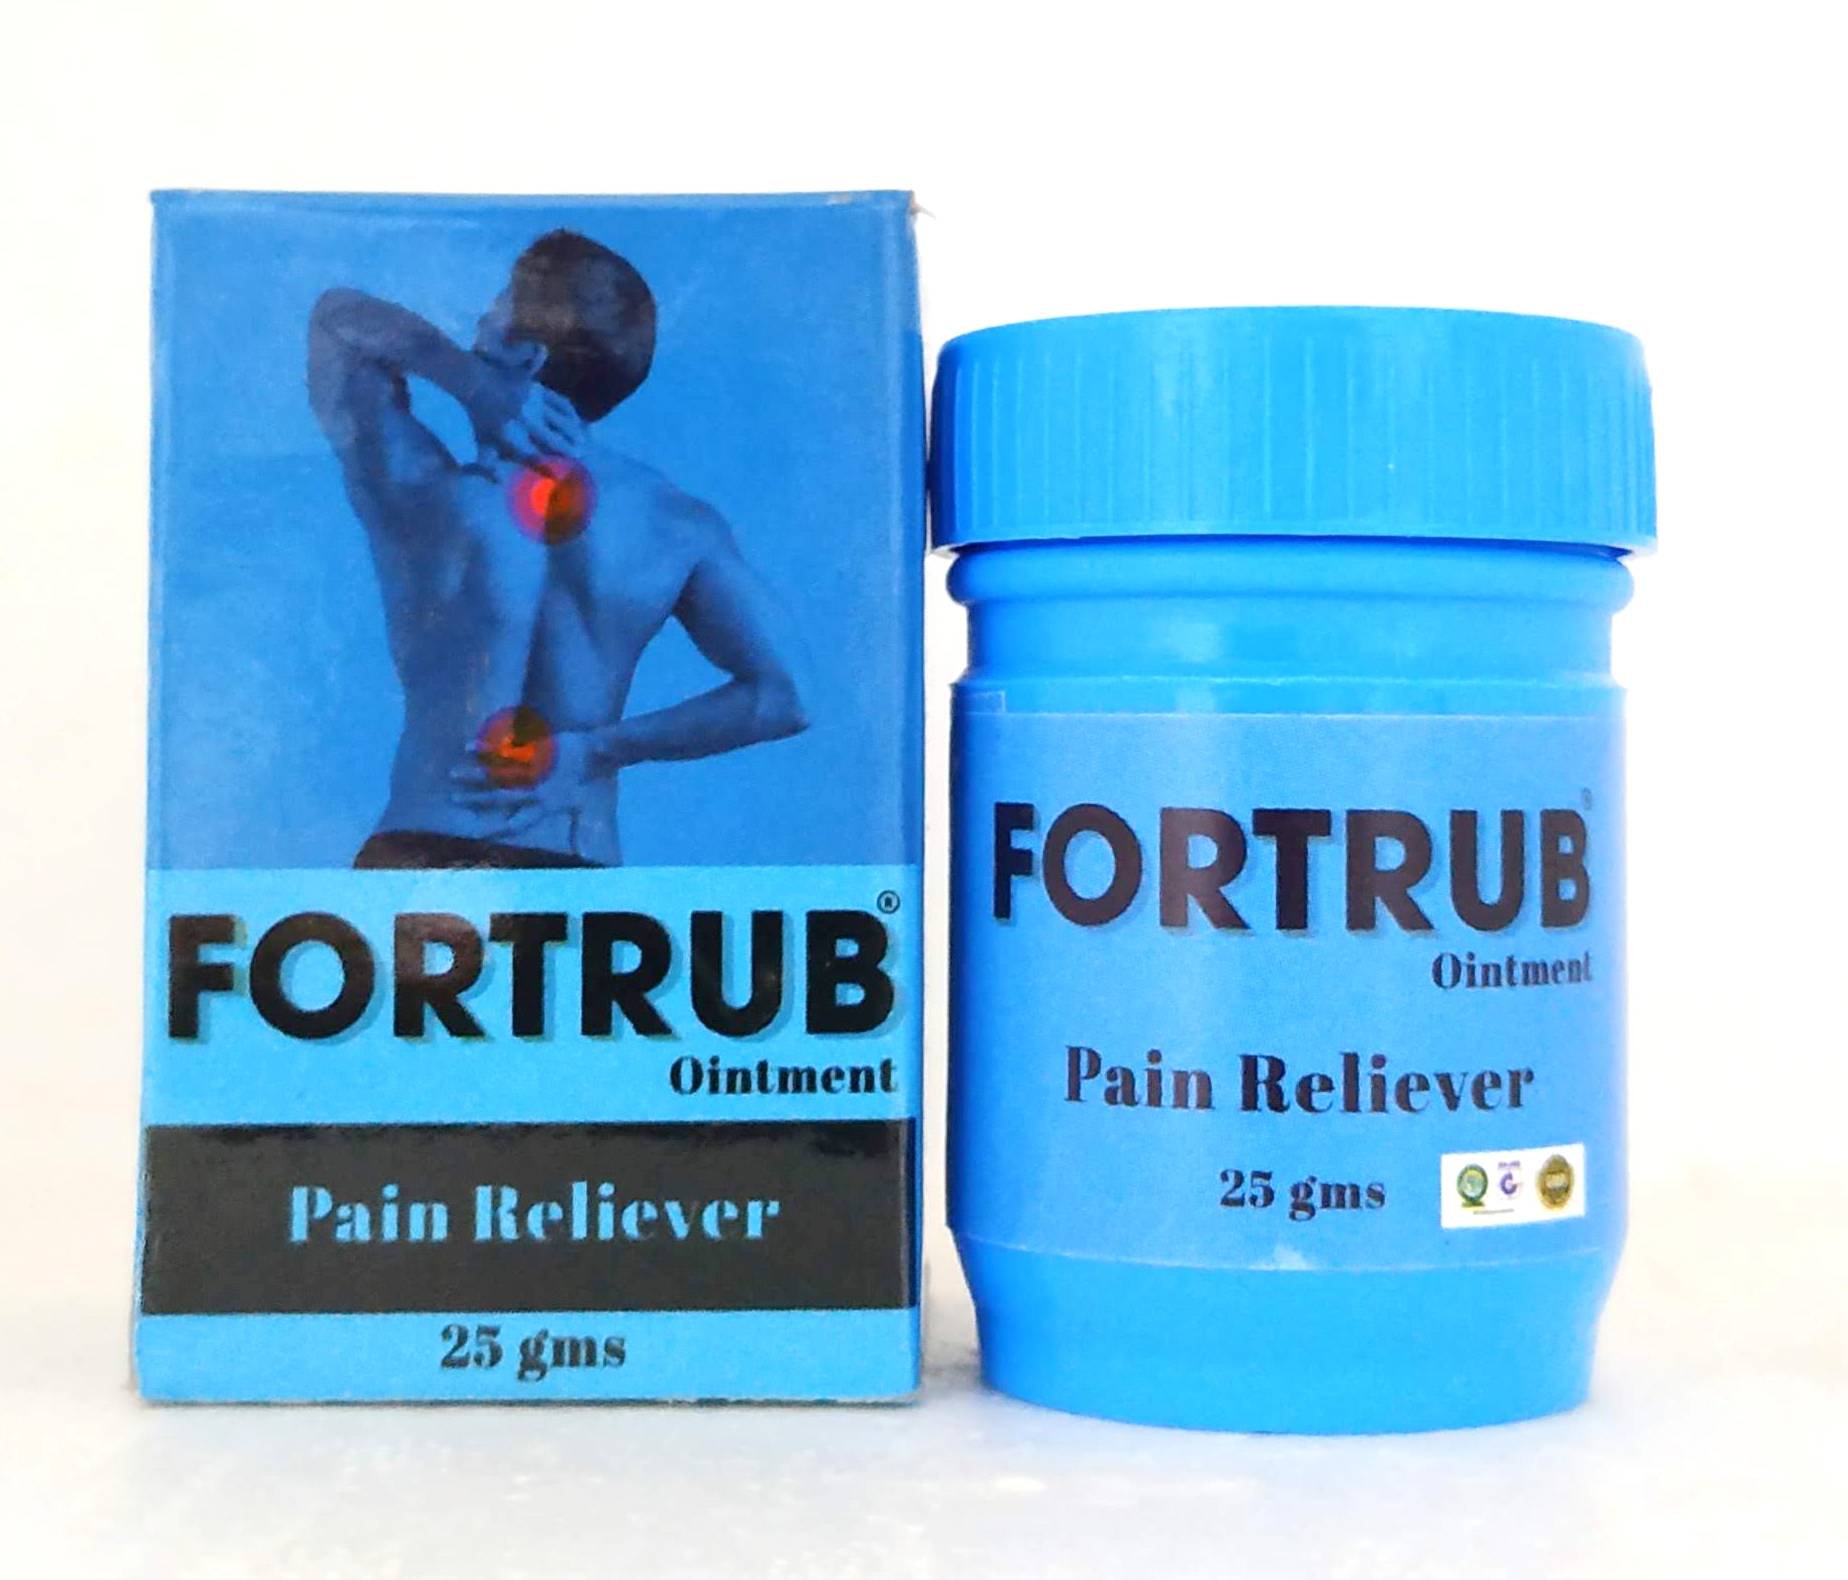 Shop Fortrub Ointment 25gm at price 80.00 from Fort Herbal Drugs Online - Ayush Care